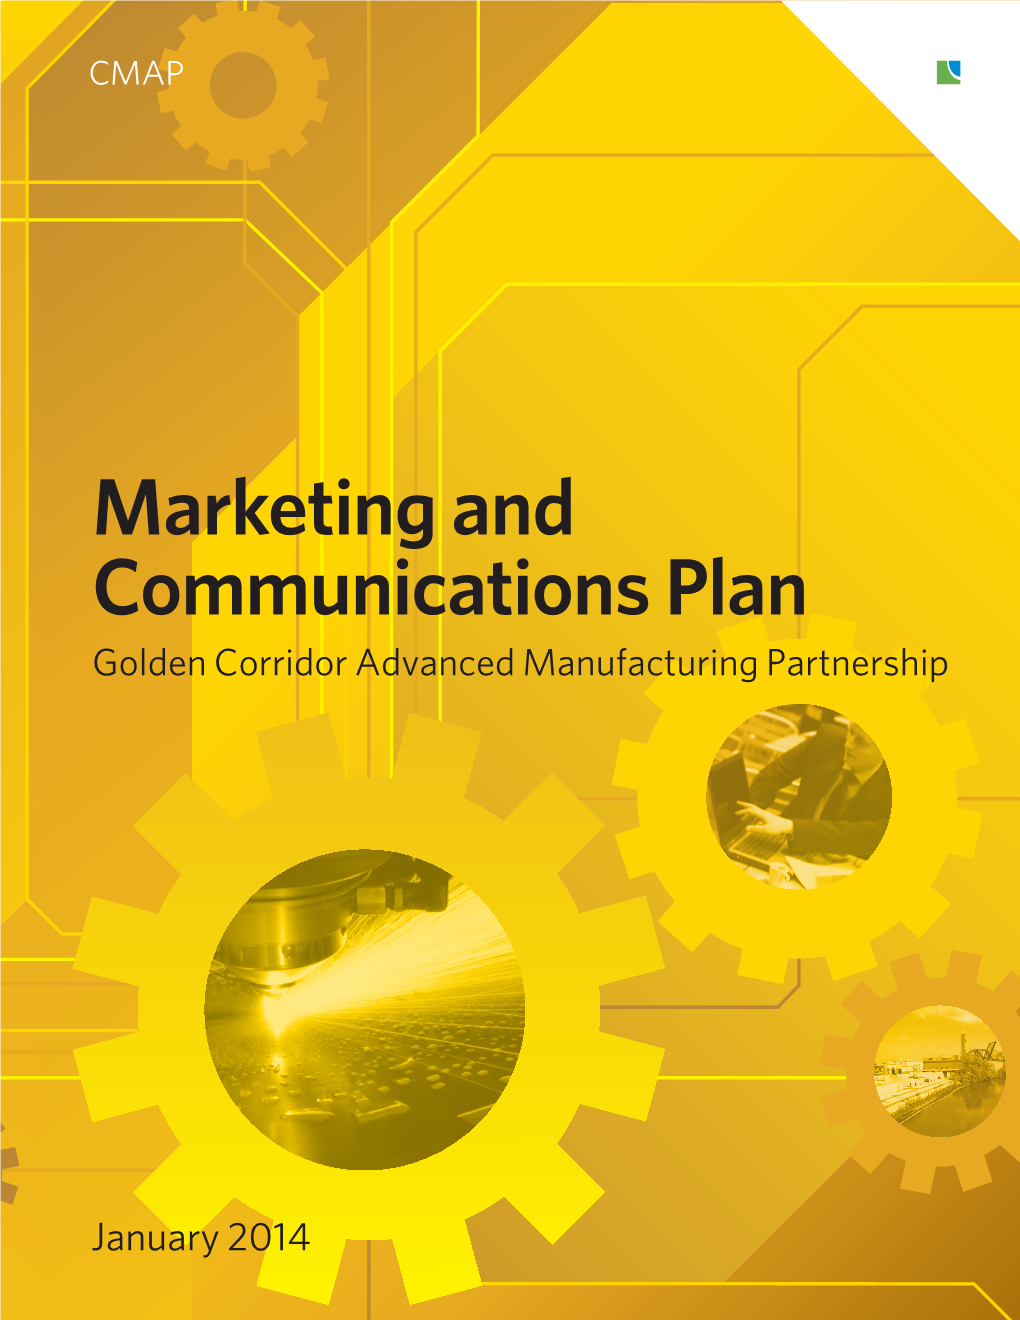 Marketing and Communications Plan for the Golden Corridor Advanced